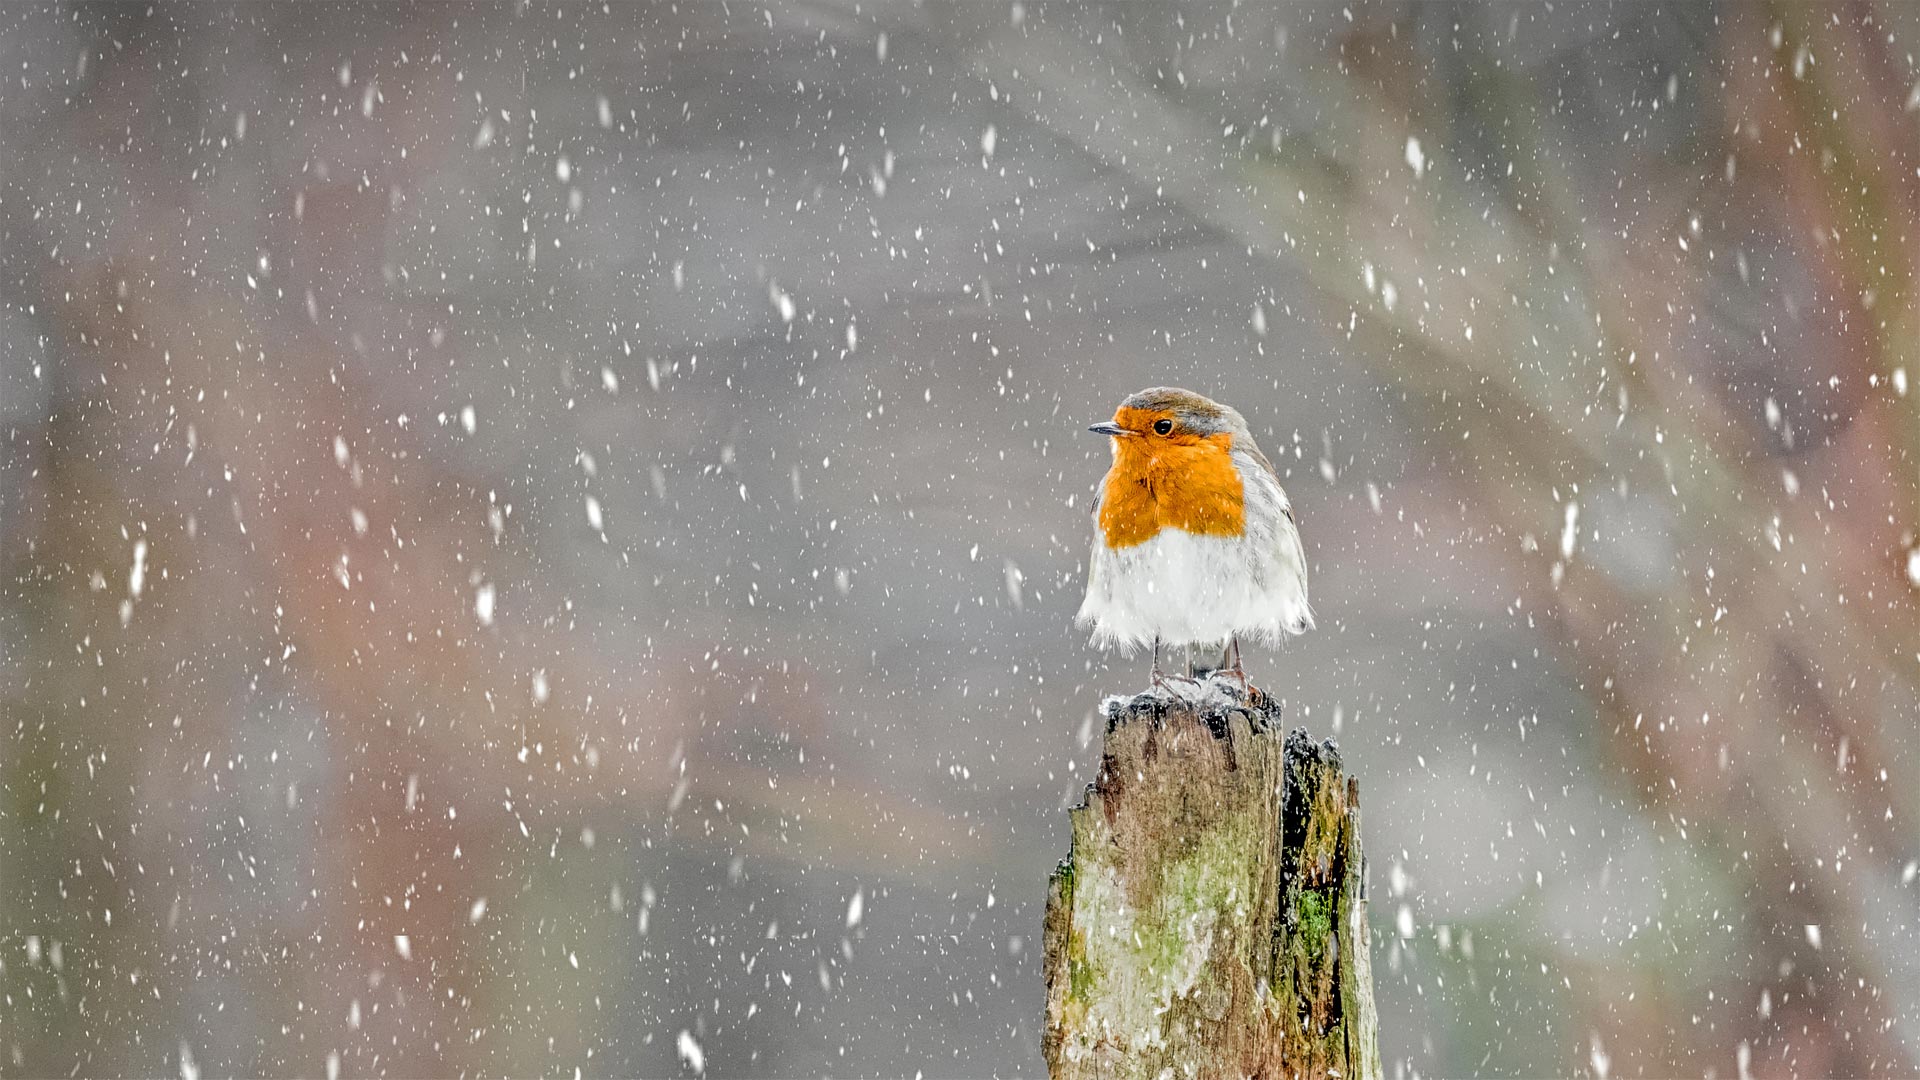 European robin during a winter snowstorm, Peak District National Park, England - Ben Robson Hull Photography/Getty Images)